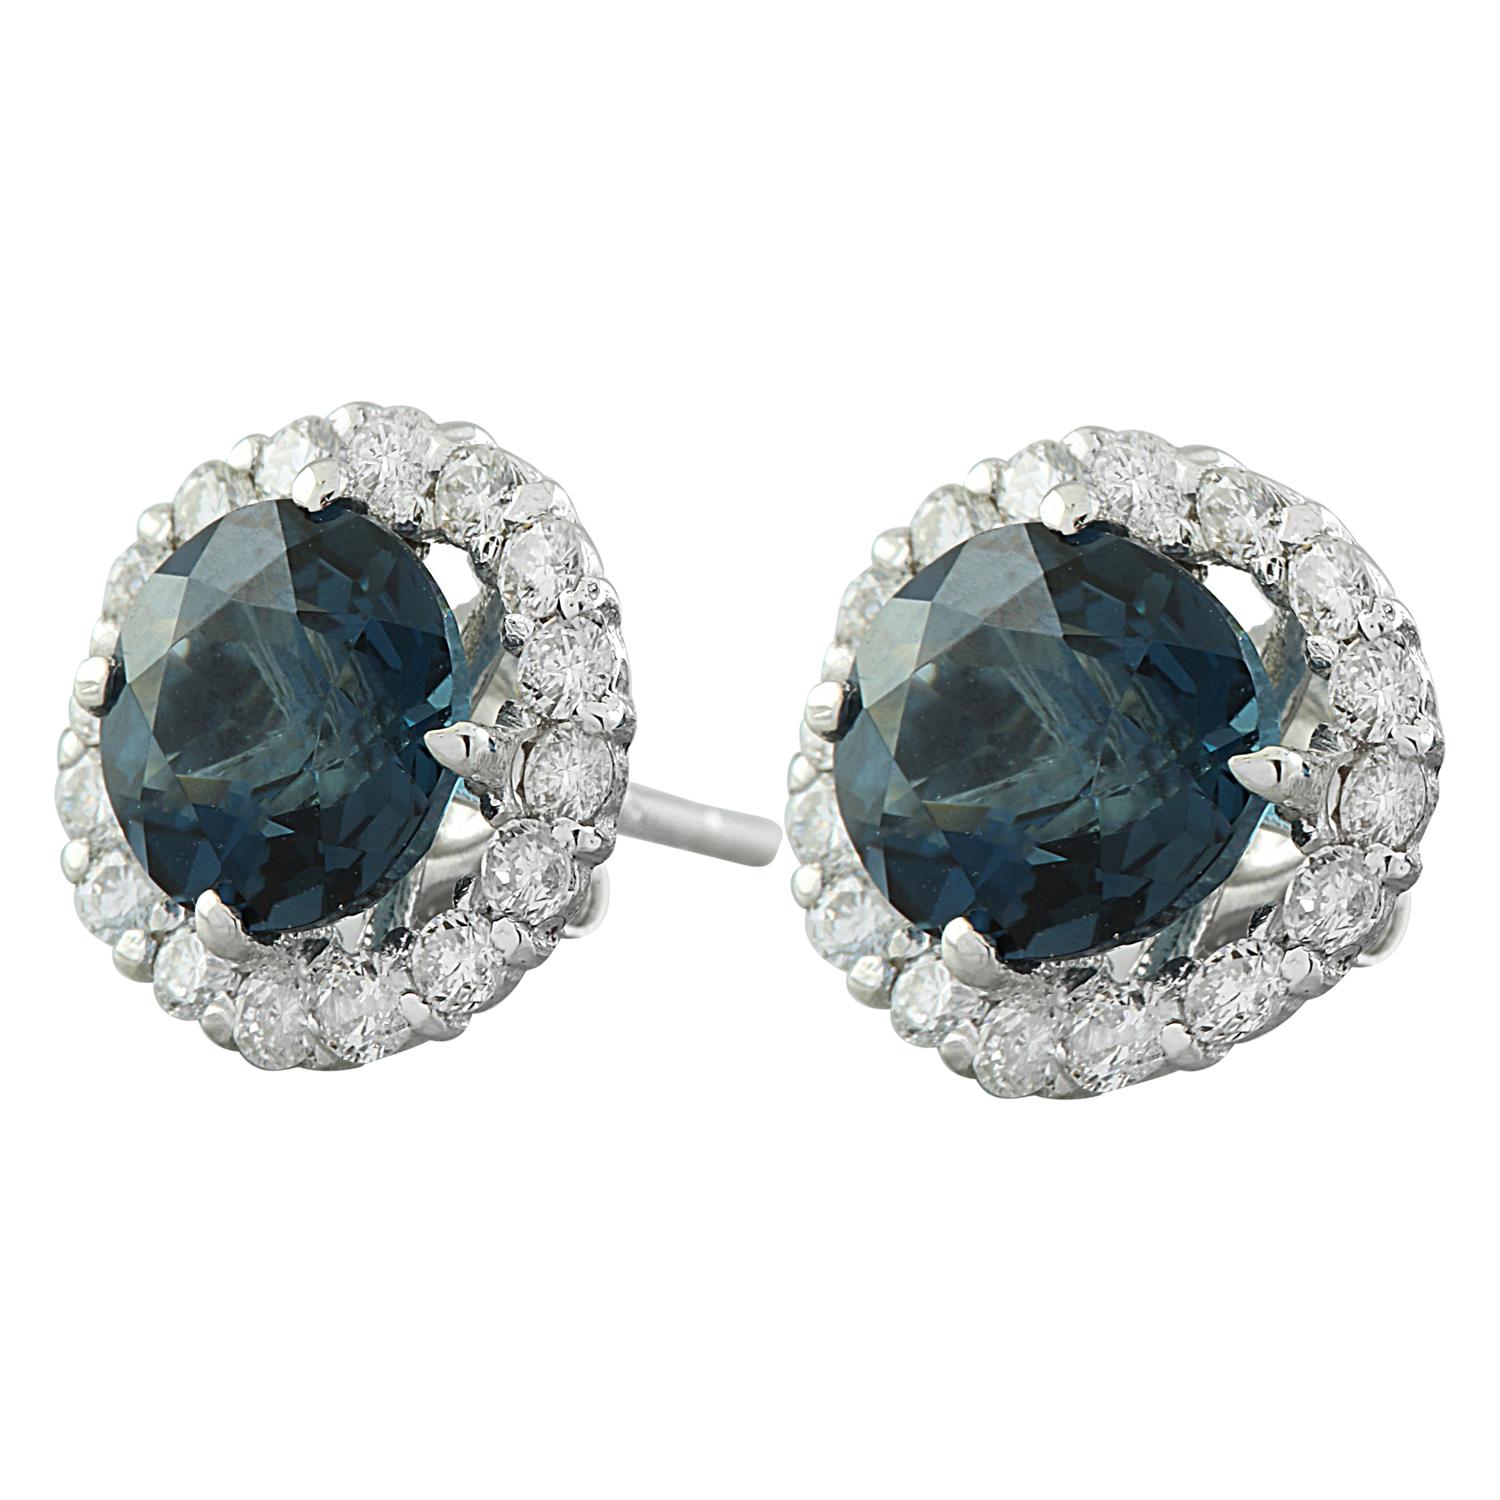 3.65 Carat Natural Topaz 14 Karat Solid White Gold Diamond Earrings
Stamped: 14K 
Total Earrings Weight: 1.5 Grams
Topaz Weight: 3.00 Carat (7.00x7.00 Millimeters)  
Quantity: 2
Diamond Weight: 0.65 Carat (F-G Color, VS2-SI1 Clarity)
Quantity: